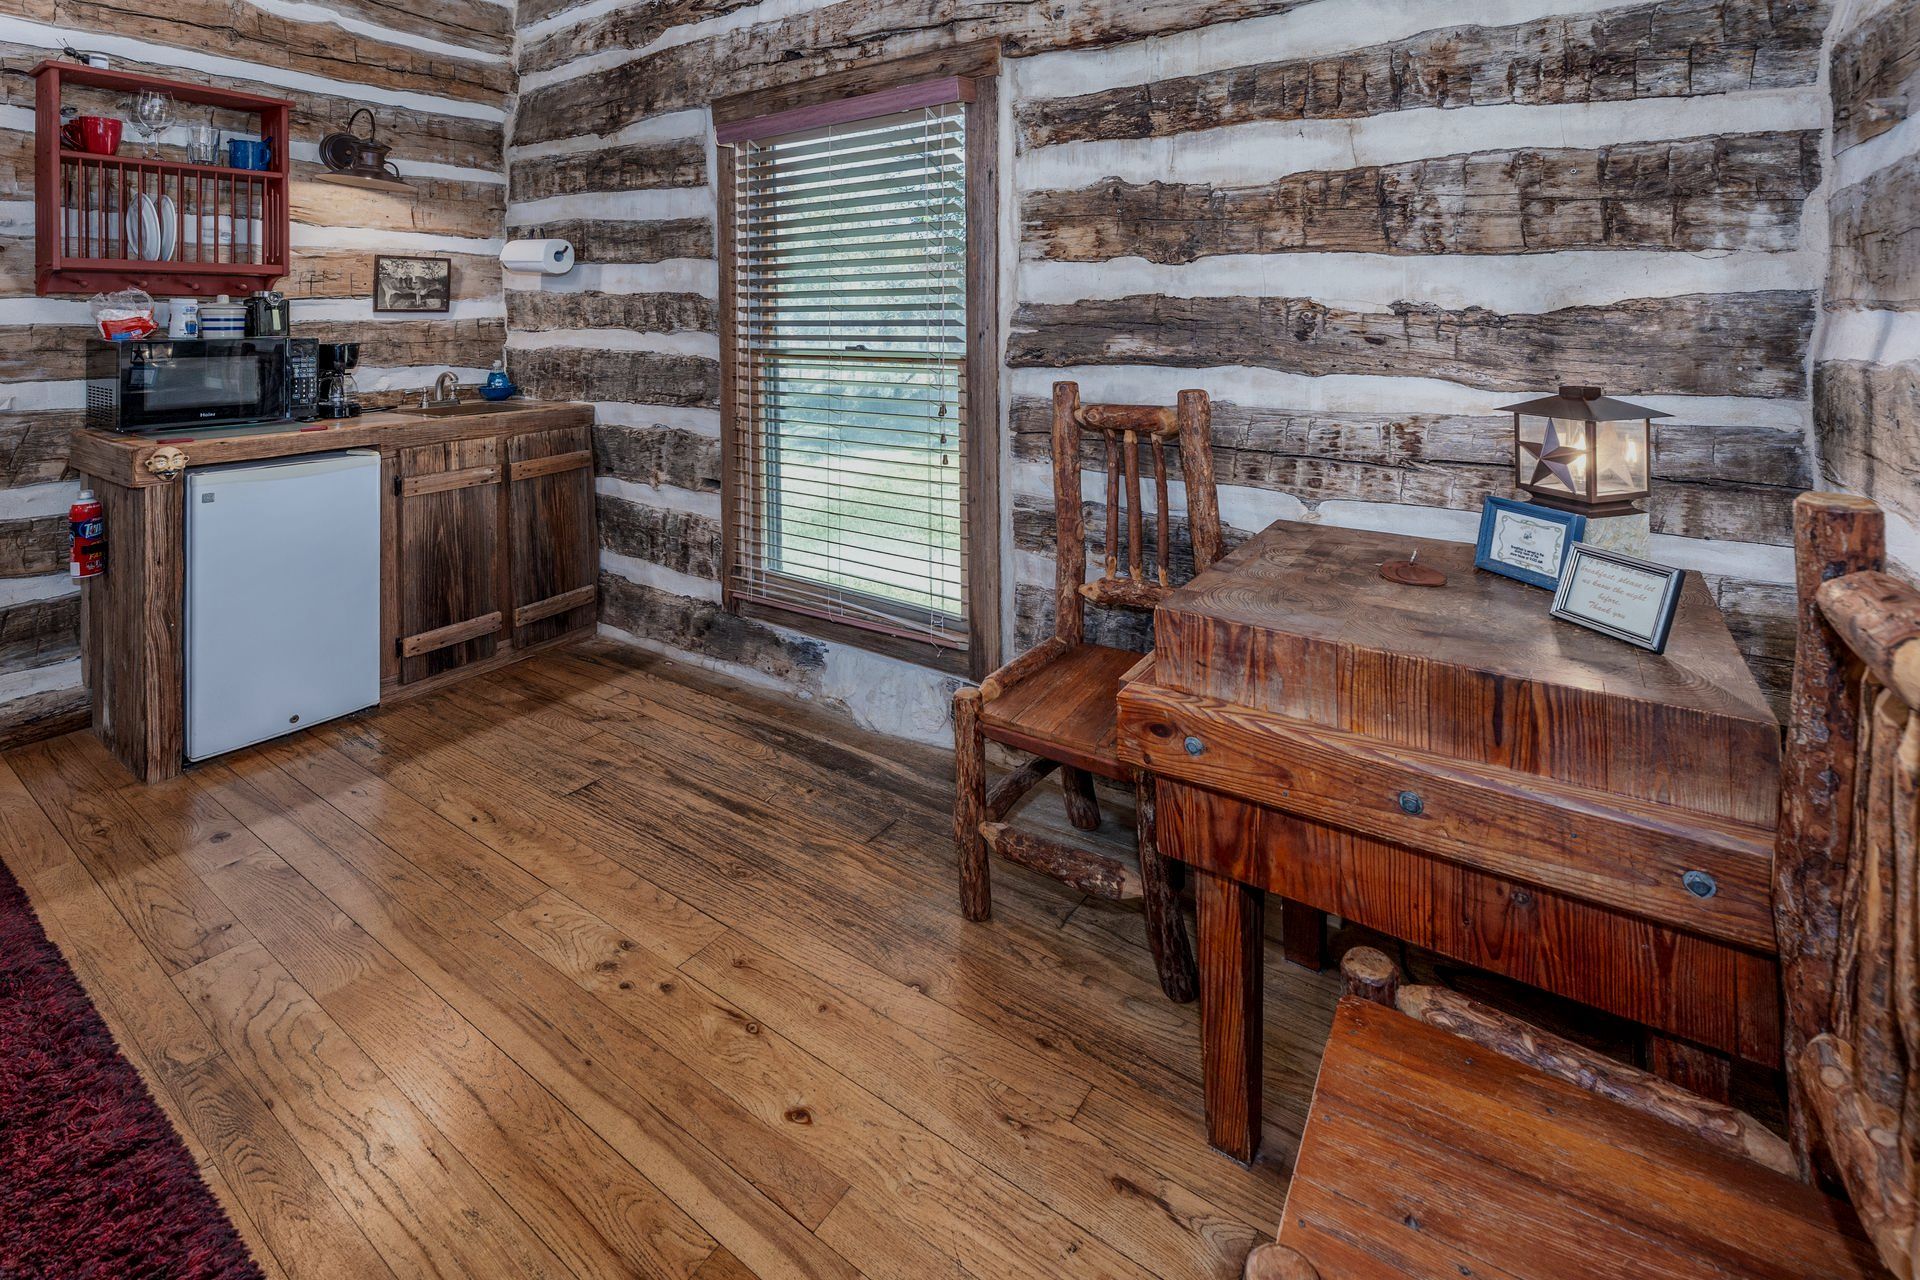 A room in a log cabin with a wooden table and chairs.